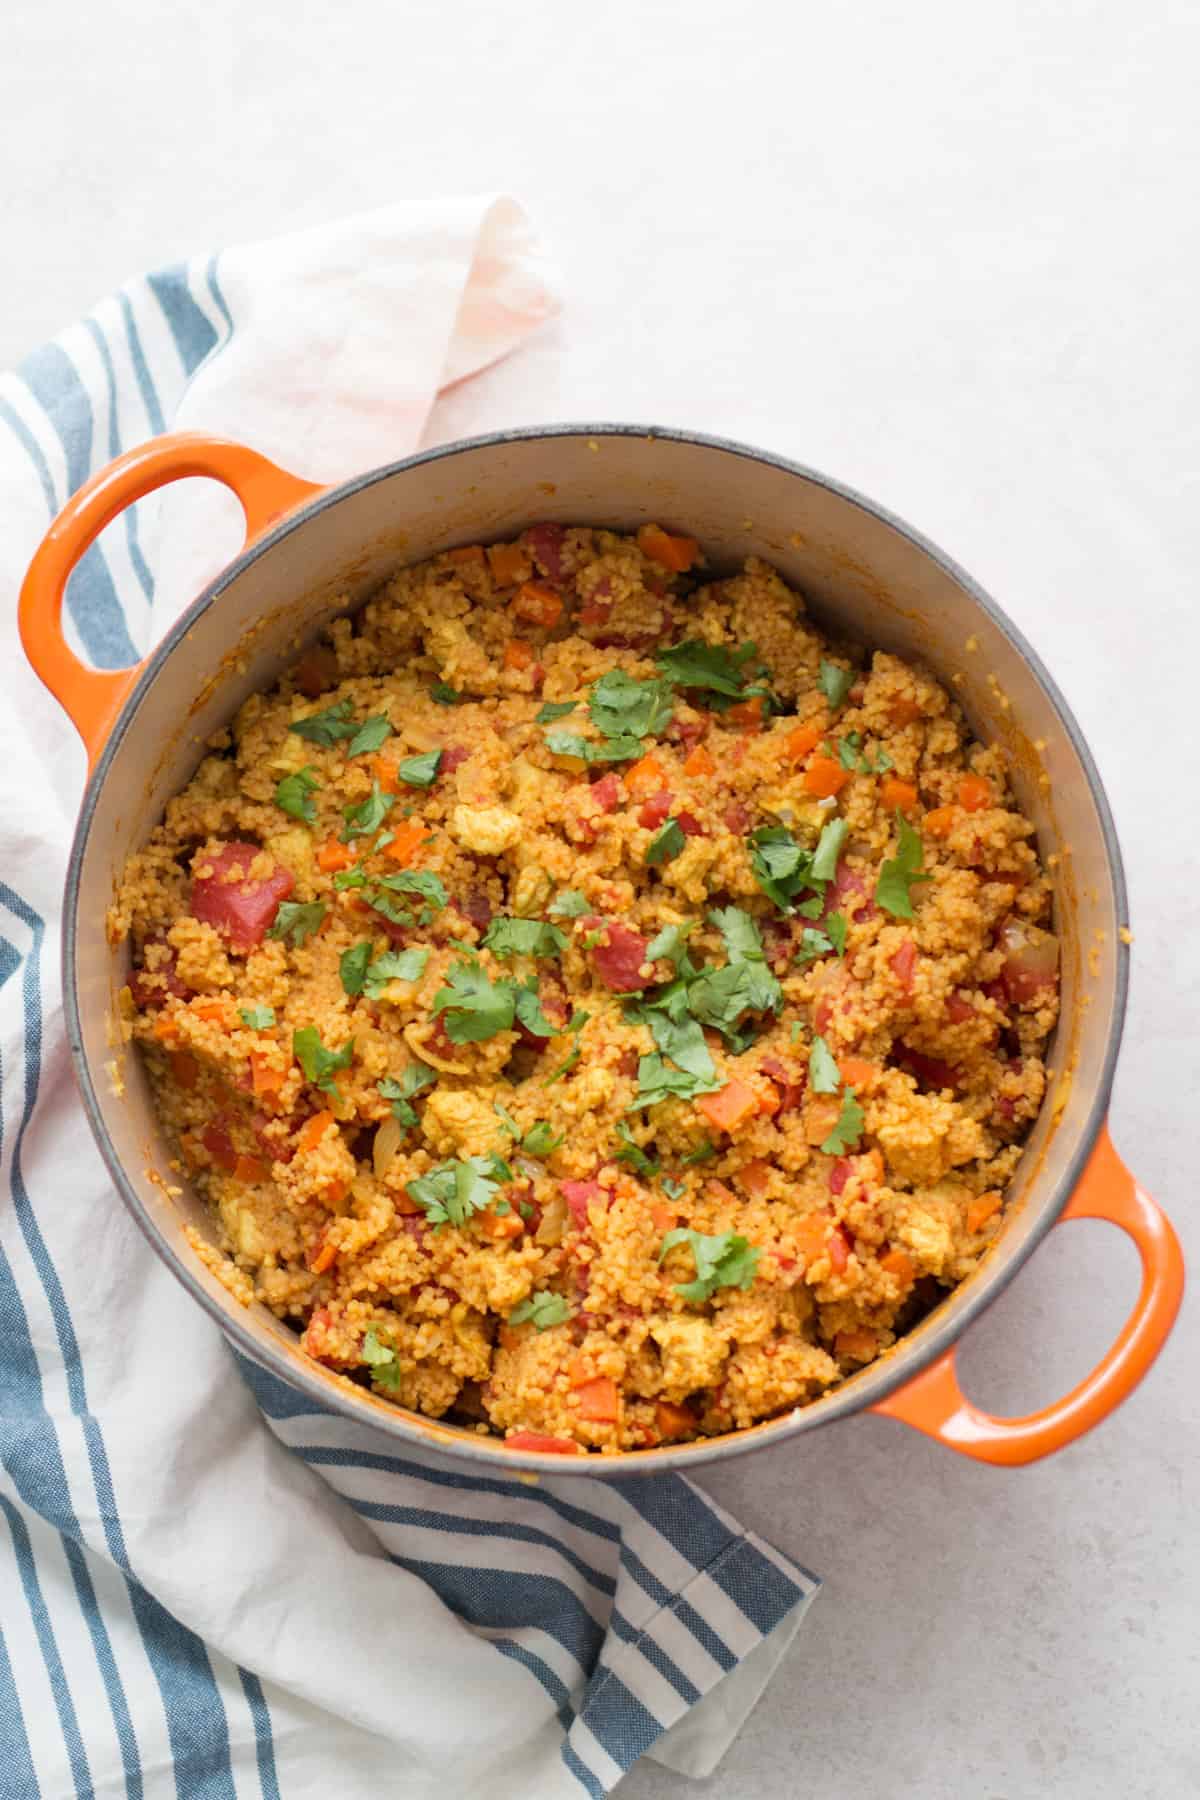 cooked couscous with fresh cilantro in a large oven Dutch oven